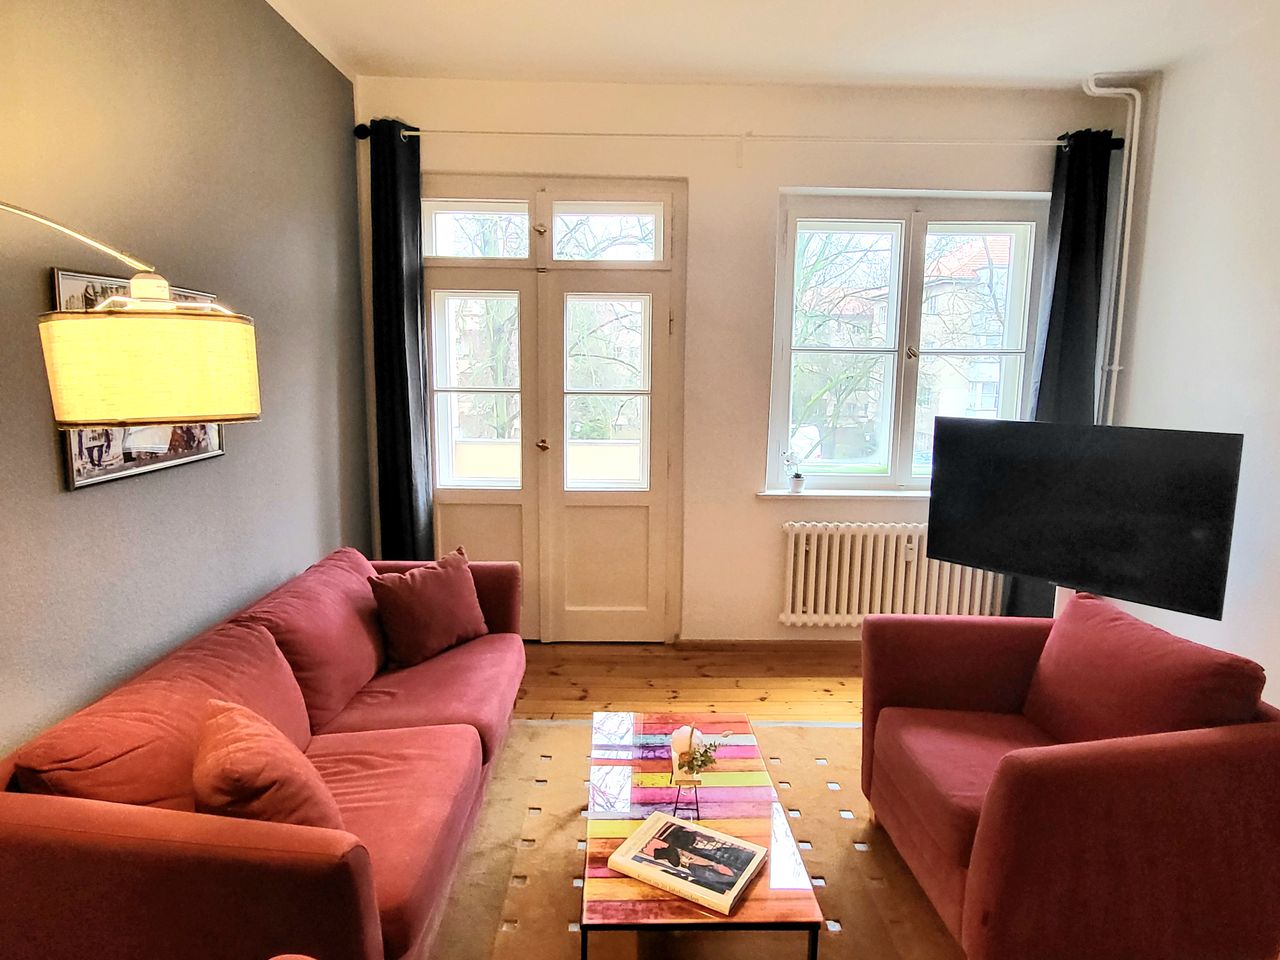 Cozy & stylish apartment close to the S-Bahn, shopping within walking distance